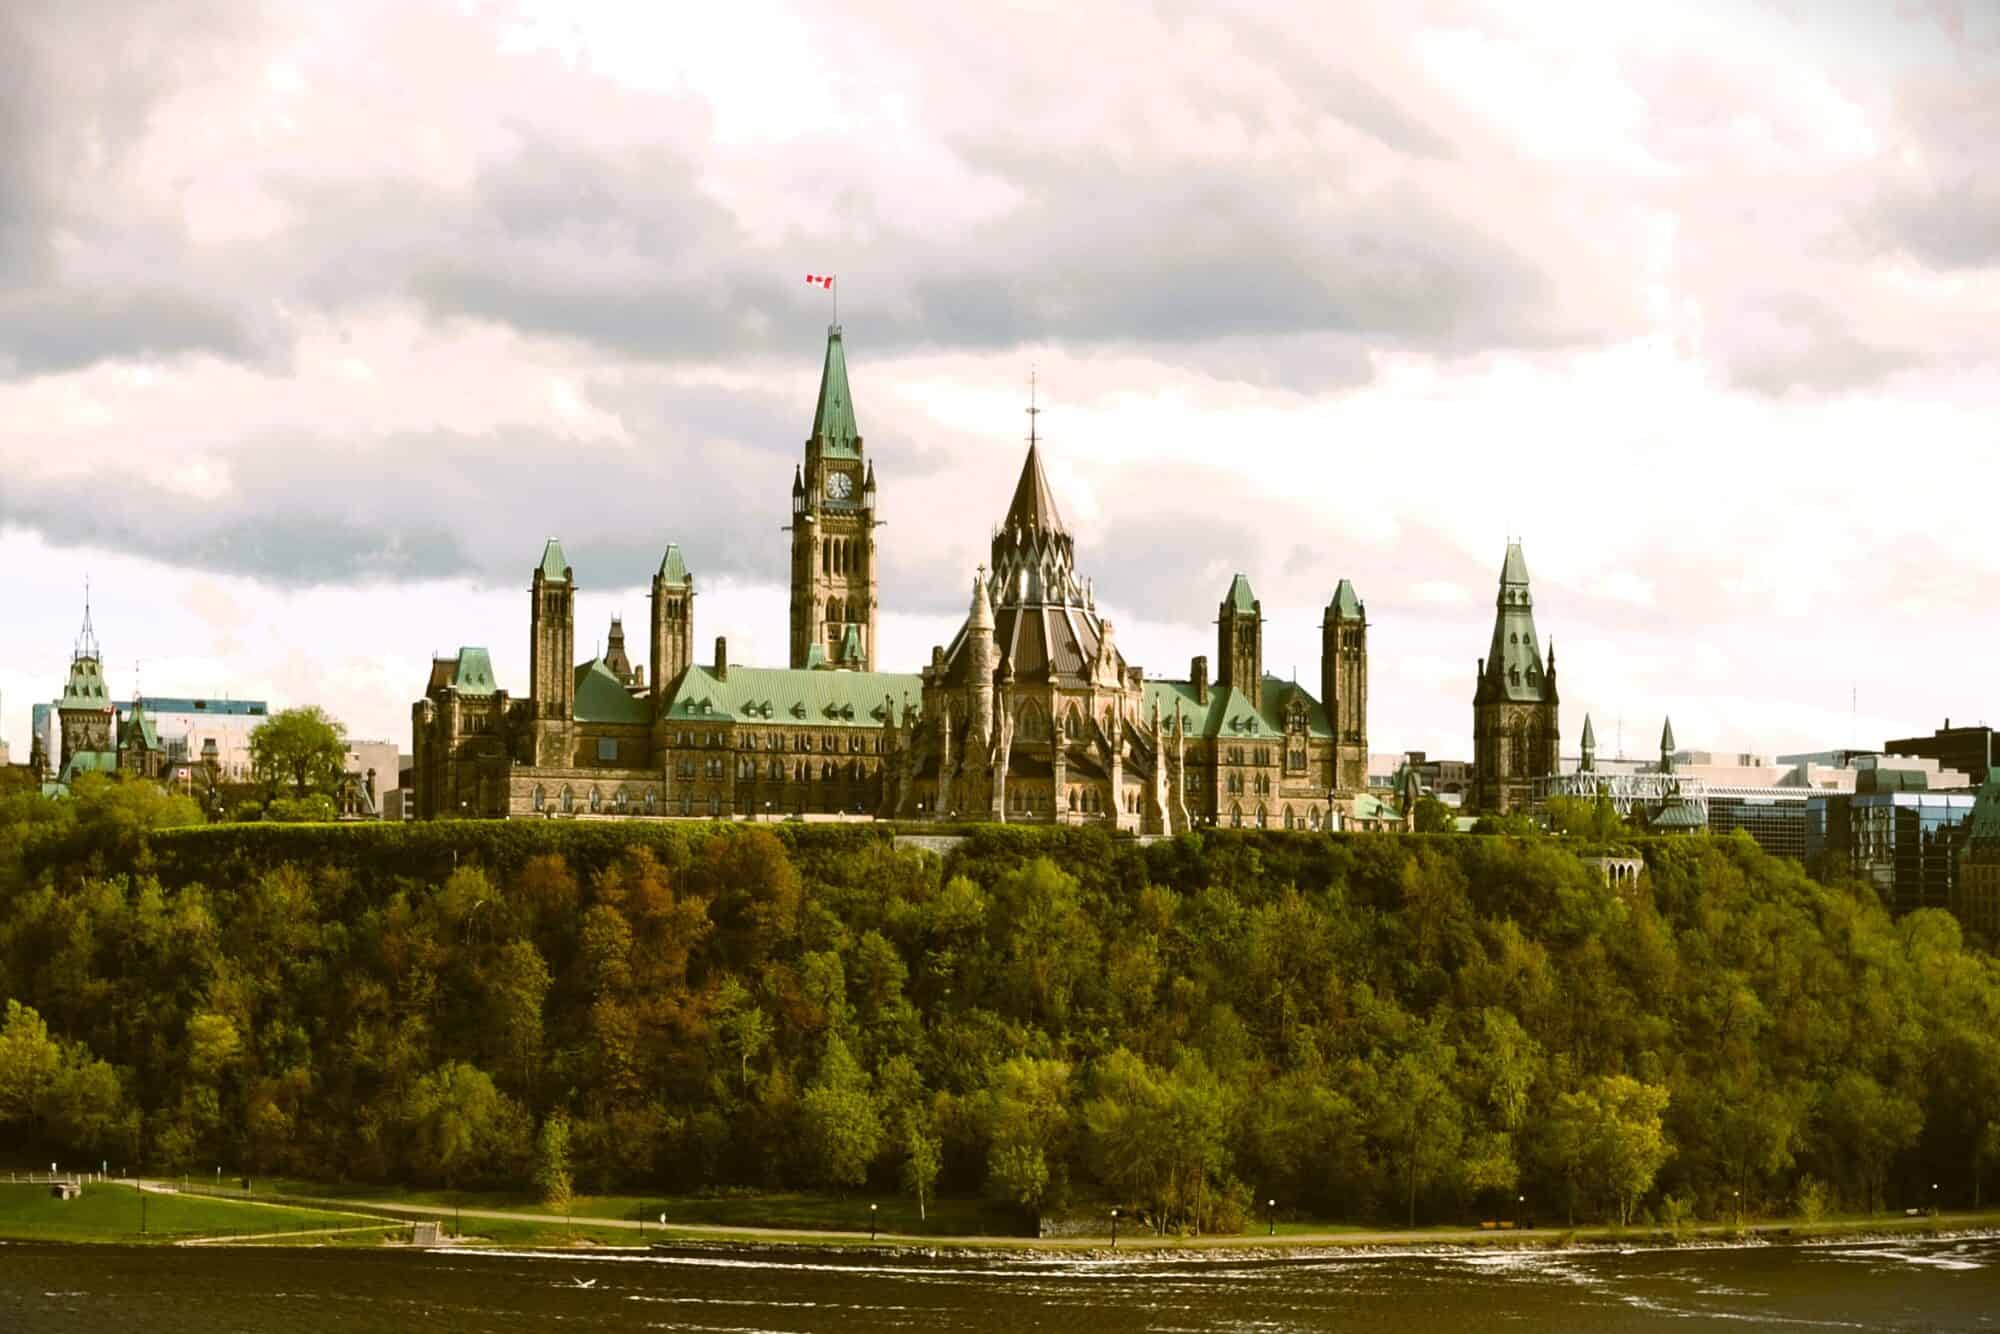 A view of Parliament Hill in Ottawa from across the Ottawa River.